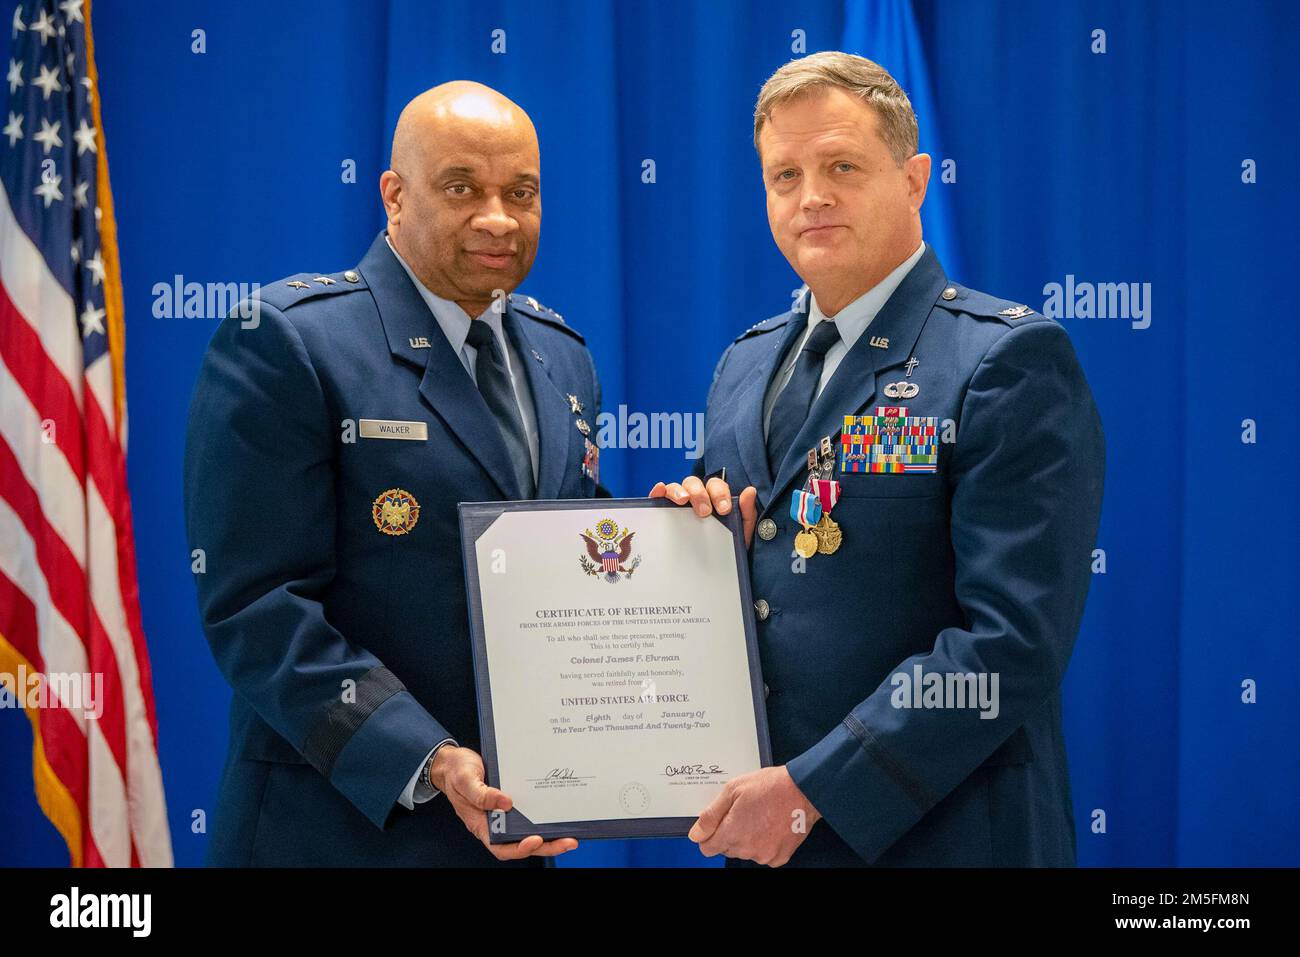 Col. Fred Ehrman, right, assistant to the command chaplain at United States Air Forces Europe and Air Forces Africa, receives his certificate of retirement from Maj. Gen. Charles Walker, director of the Office of Complex Investigations at the National Guard Bureau, during a ceremony at the Kentucky Air National Guard Base in Louisville, Ky., March 13, 2022. Ehrman served as a chaplain at the Kentucky Air National Guard’s 123rd Airlift Wing for 16 years. Stock Photo